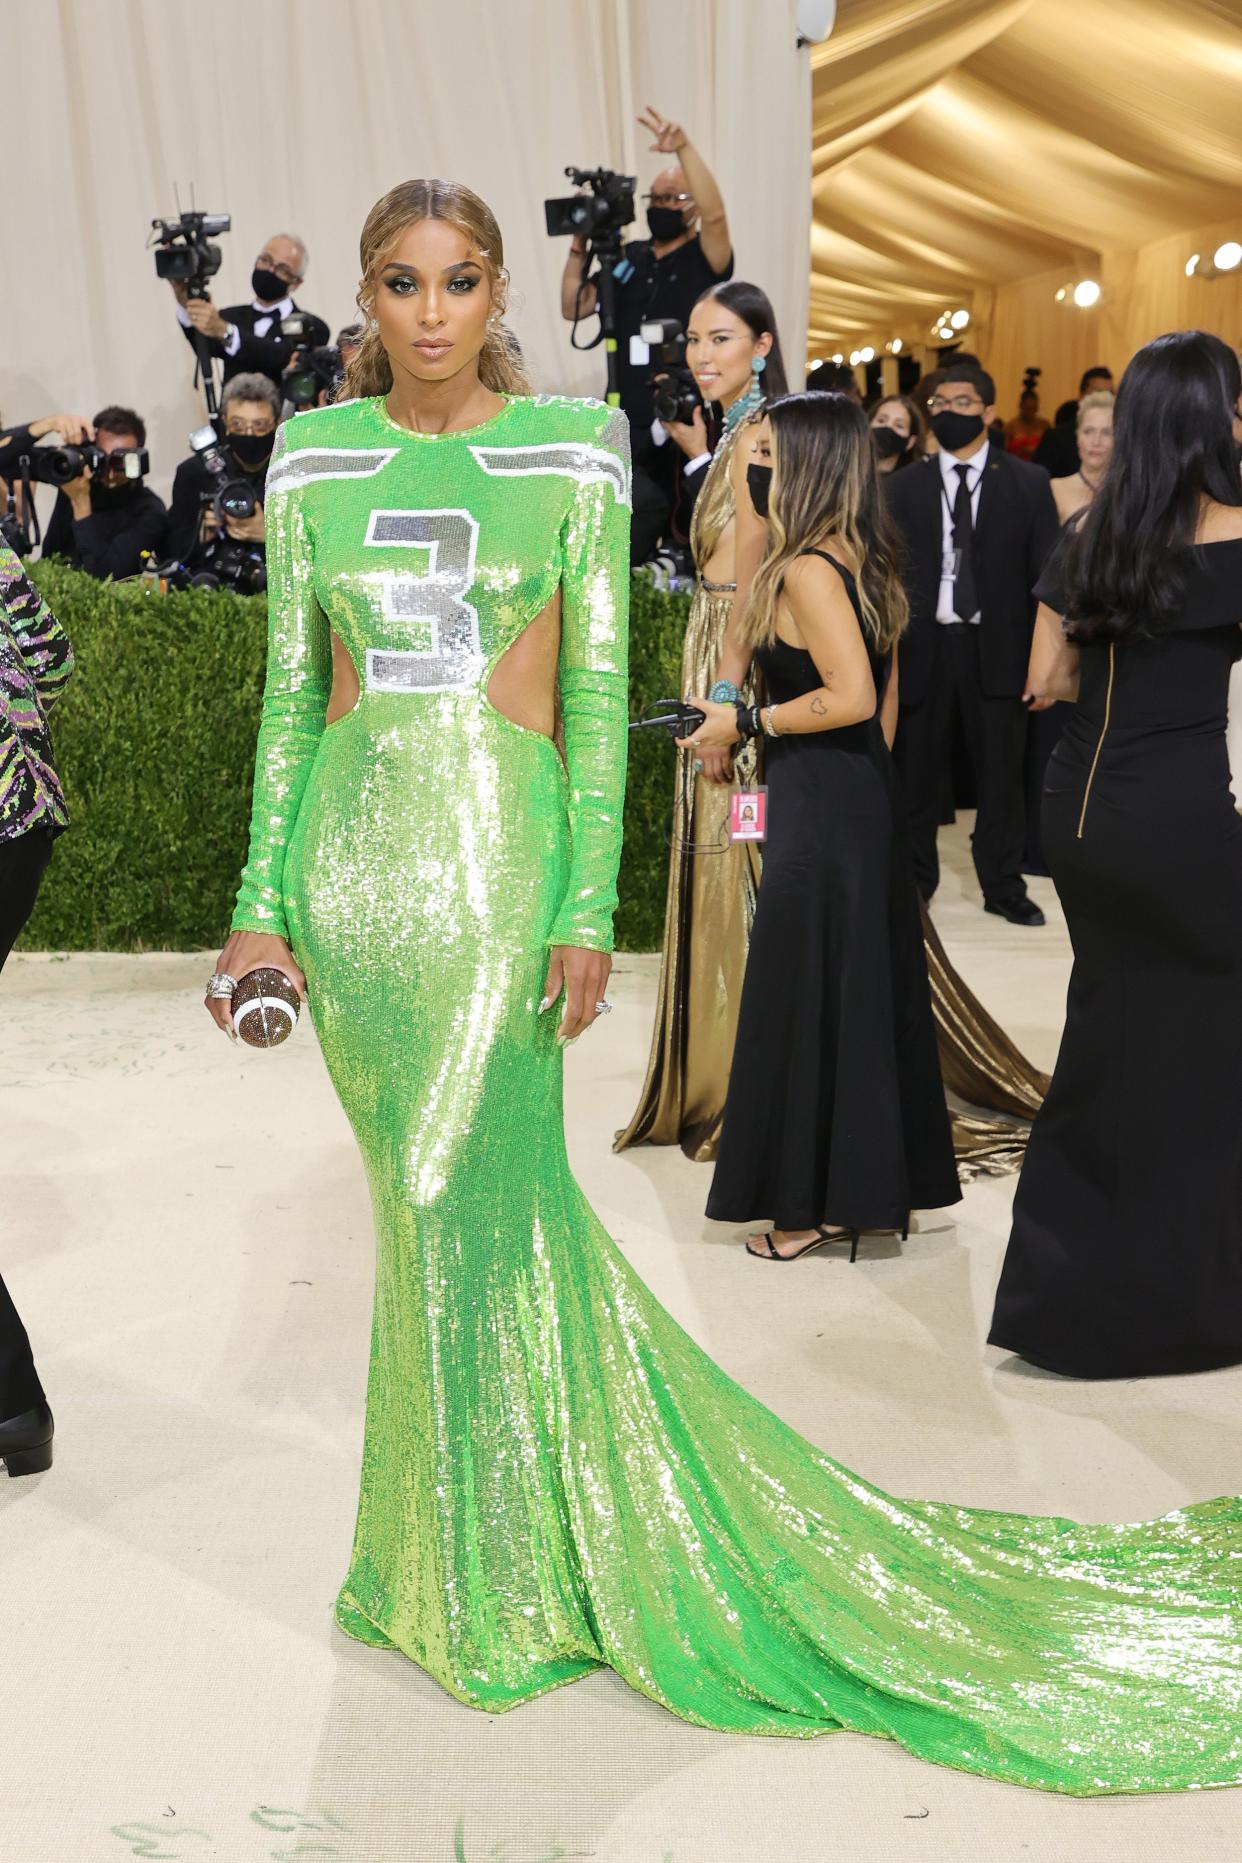 Ciara attends The 2021 Met Gala Celebrating In America: A Lexicon Of Fashion at Metropolitan Museum of Art on Sept. 13, 2021 in New York.